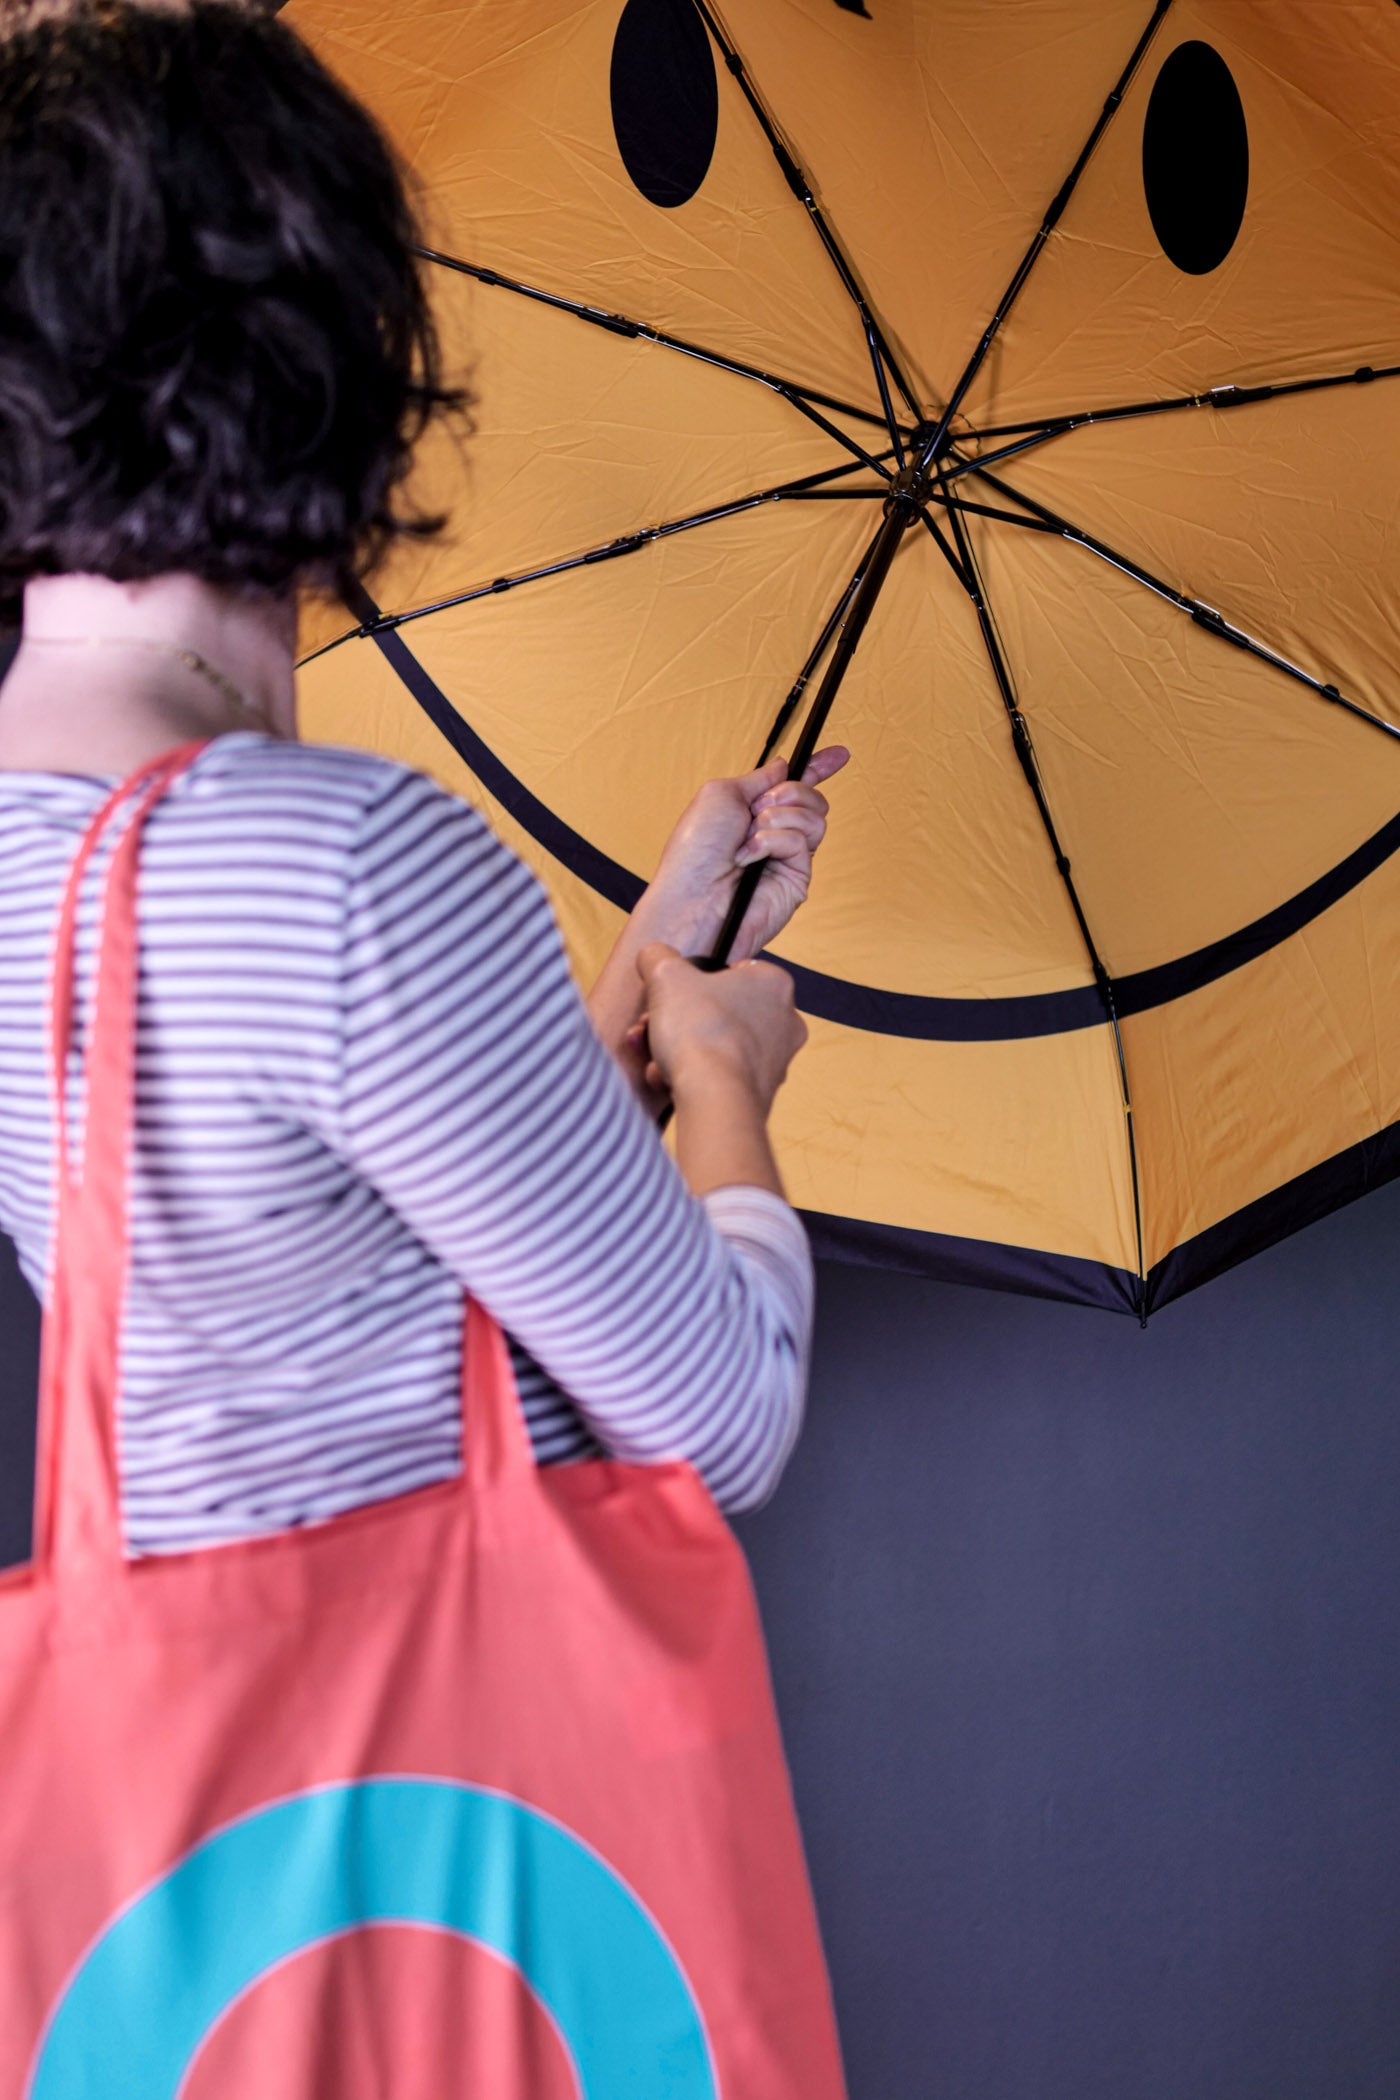 Woman holding an open umbrella with a yellow smiley face inside